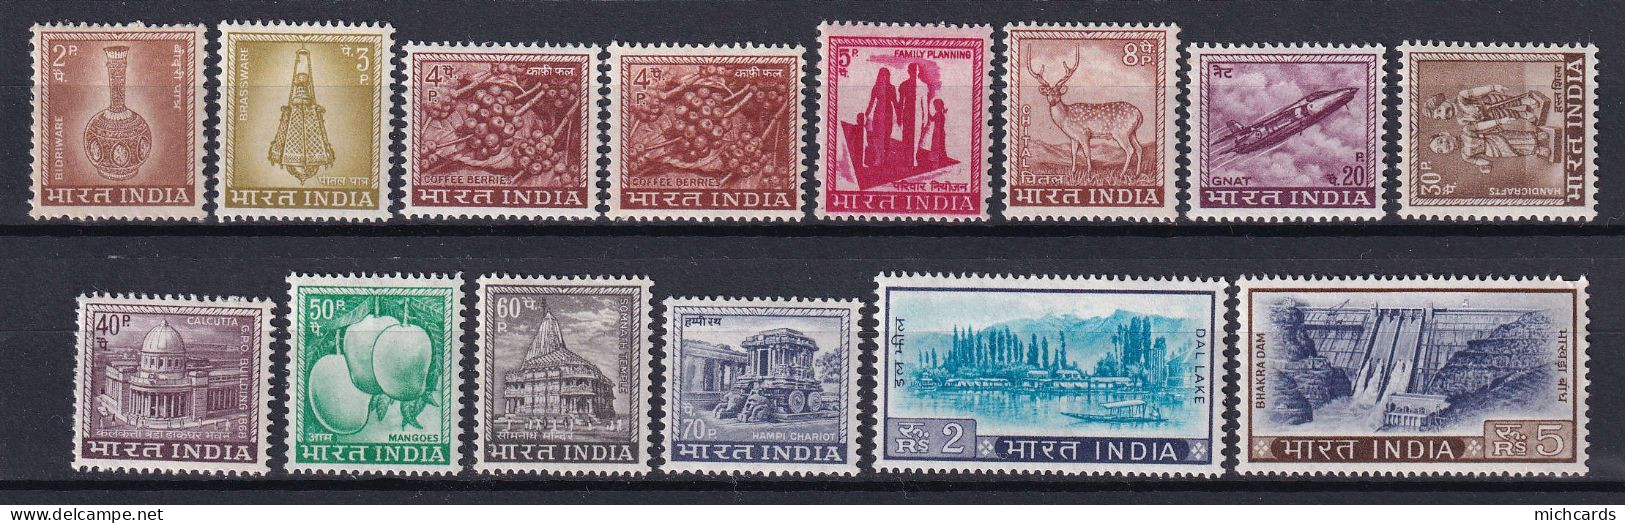 185 INDE 1967/69 - Yvert 222/32 - Serie Courante Definitive - Neuf ** (MNH) Sans Charniere - Unused Stamps